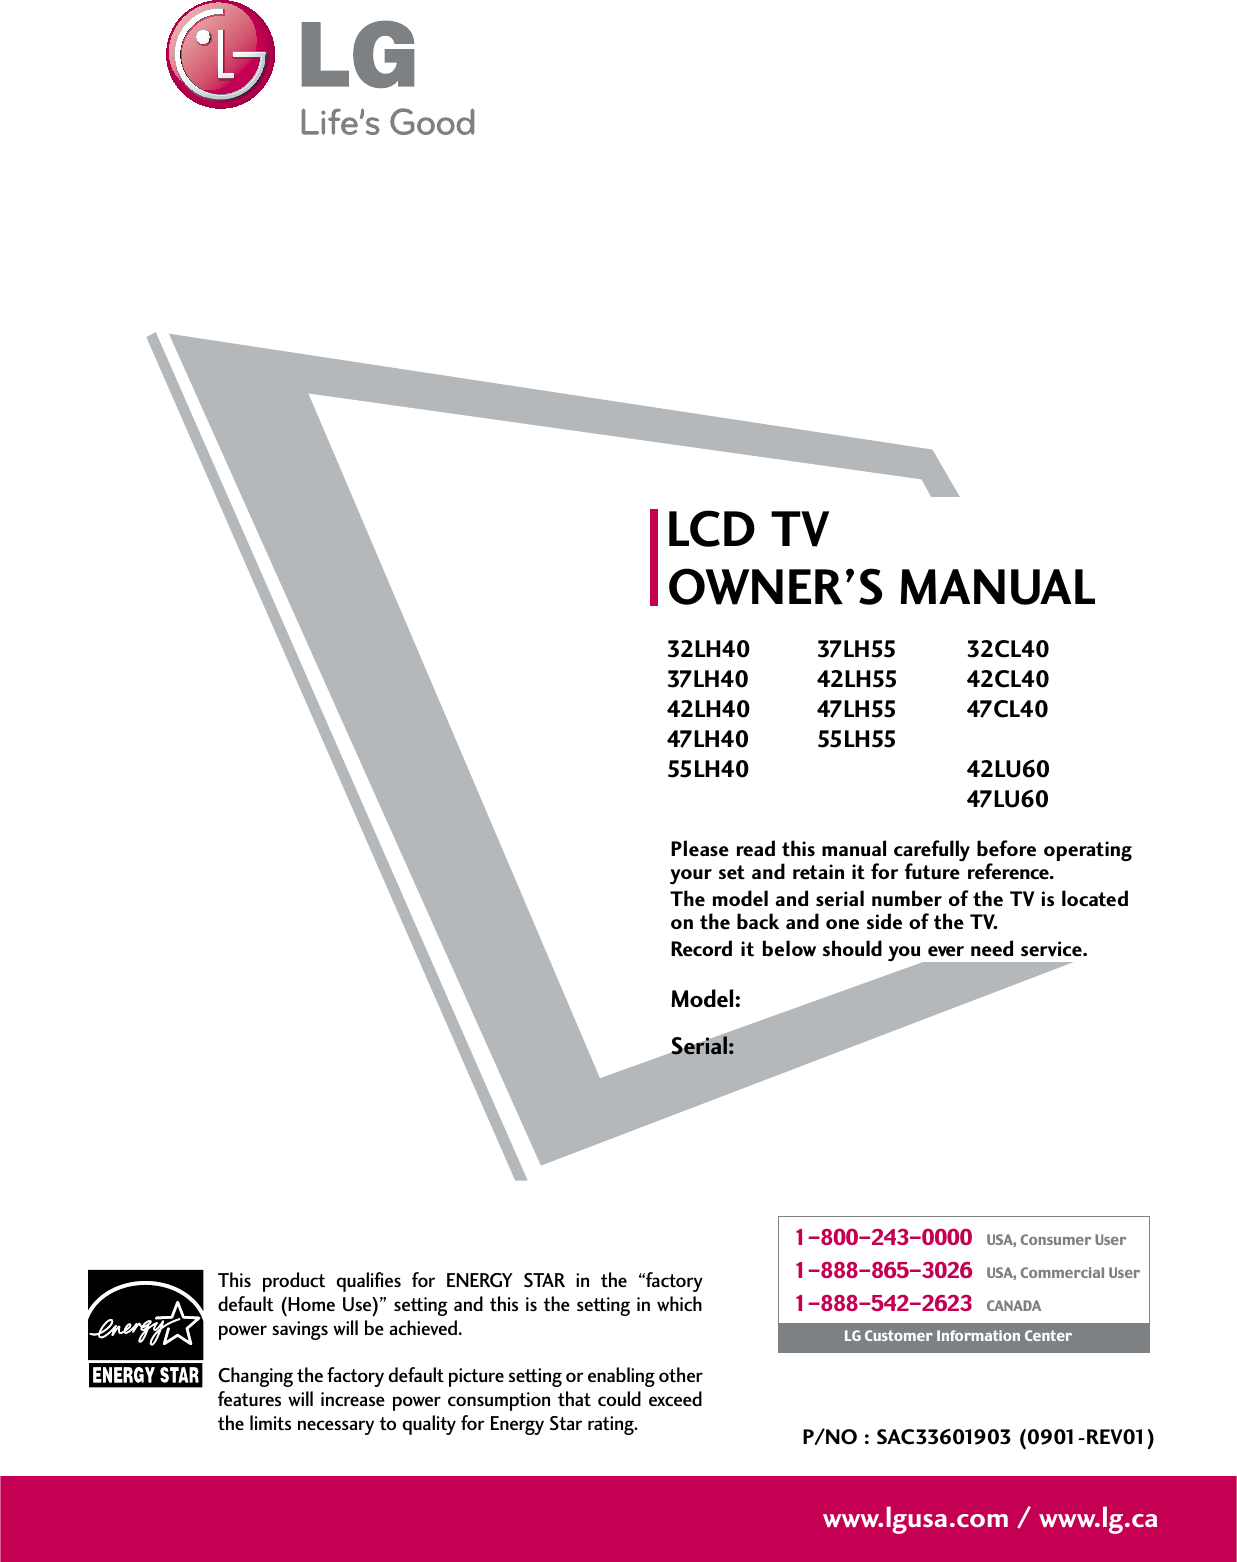 Please read this manual carefully before operatingyour set and retain it for future reference.The model and serial number of the TV is locatedon the back and one side of the TV. Record it below should you ever need service.LCD TVOWNER’S MANUAL32LH4037LH4042LH4047LH4055LH4037LH5542LH5547LH5555LH5532CL4042CL4047CL4042LU6047LU60P/NO : SAC33601903 (0901-REV01)www.lgusa.com / www.lg.caThis product qualifies for ENERGY STAR in the “factorydefault (Home Use)” setting and this is the setting in whichpower savings will be achieved.Changing the factory default picture setting or enabling otherfeatures will increase power consumption that could exceedthe limits necessary to quality for Energy Star rating.Model:Serial:1-800-243-0000   USA, Consumer User1-888-865-3026   USA, Commercial User1-888-542-2623   CANADALG Customer Information Center